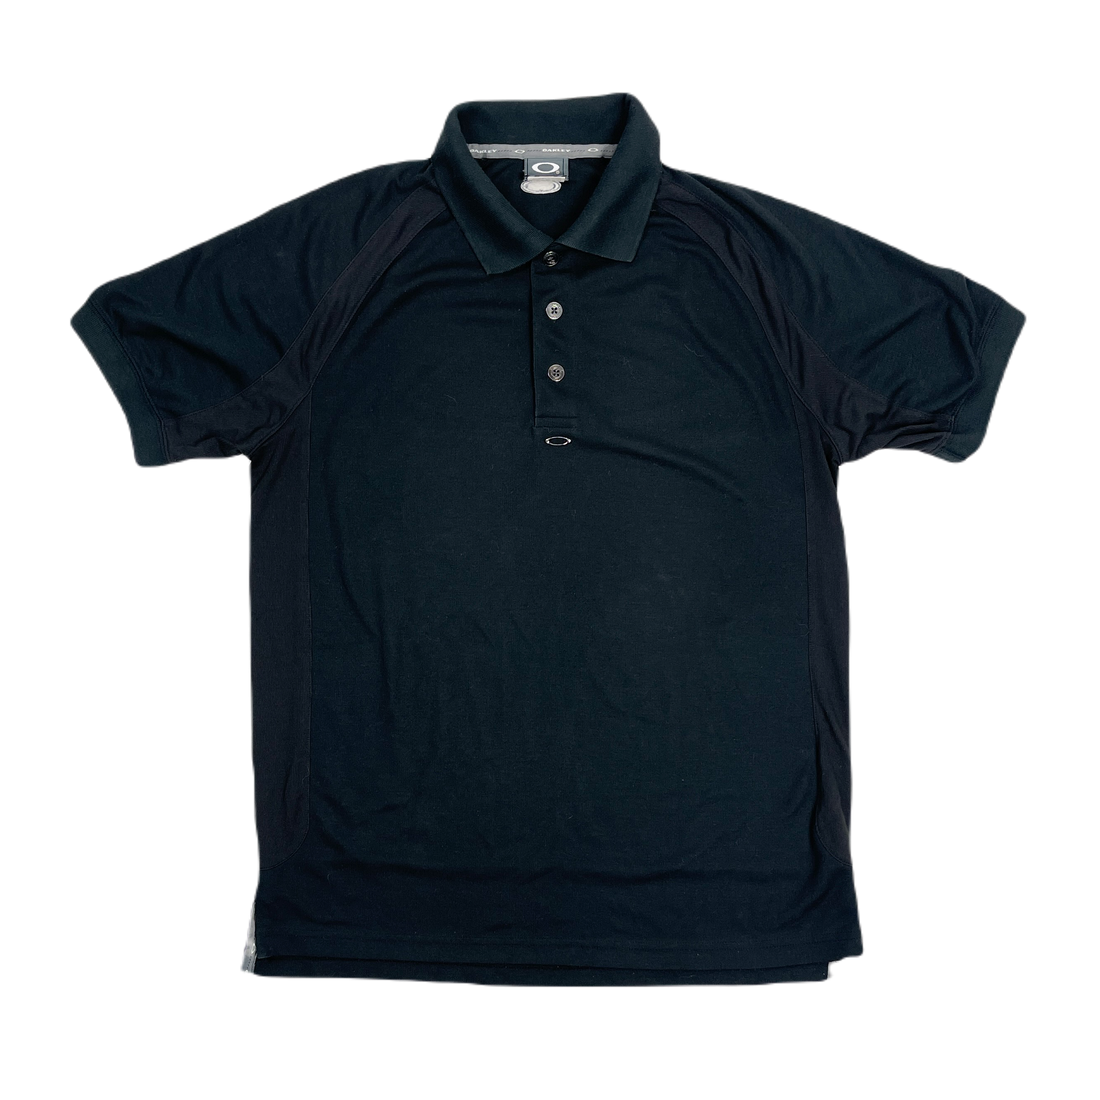 Oakley Red Core Black 2-Texture Polo Shirt 2000's